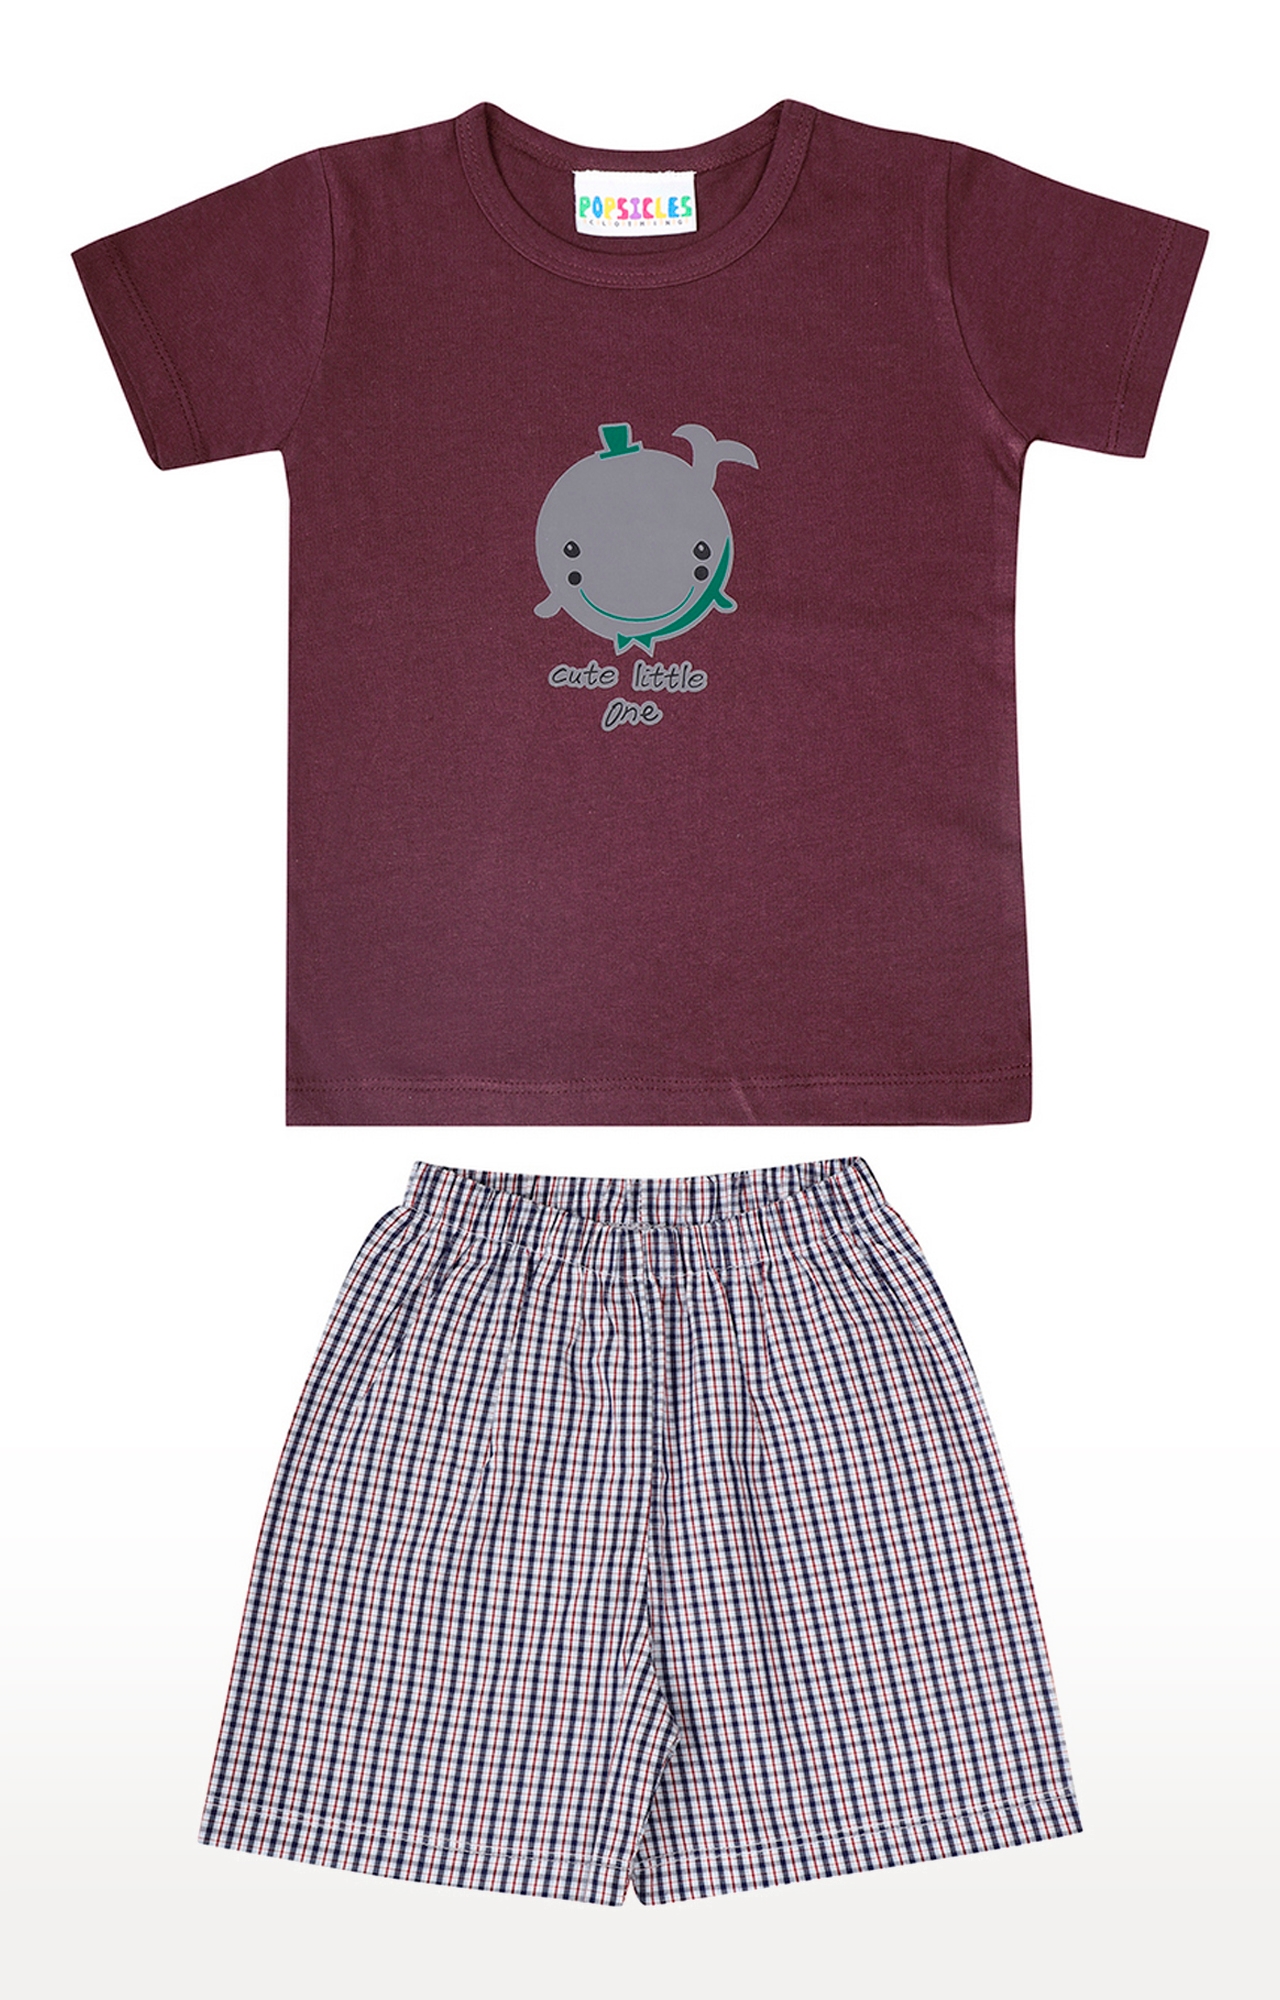 Popsicles Clothing | Popsicles Soft Cotton Comfort fit Round Neck Short Sleeves T-Shirt and Shorts Set for Boys - Burgundy (0-6M)